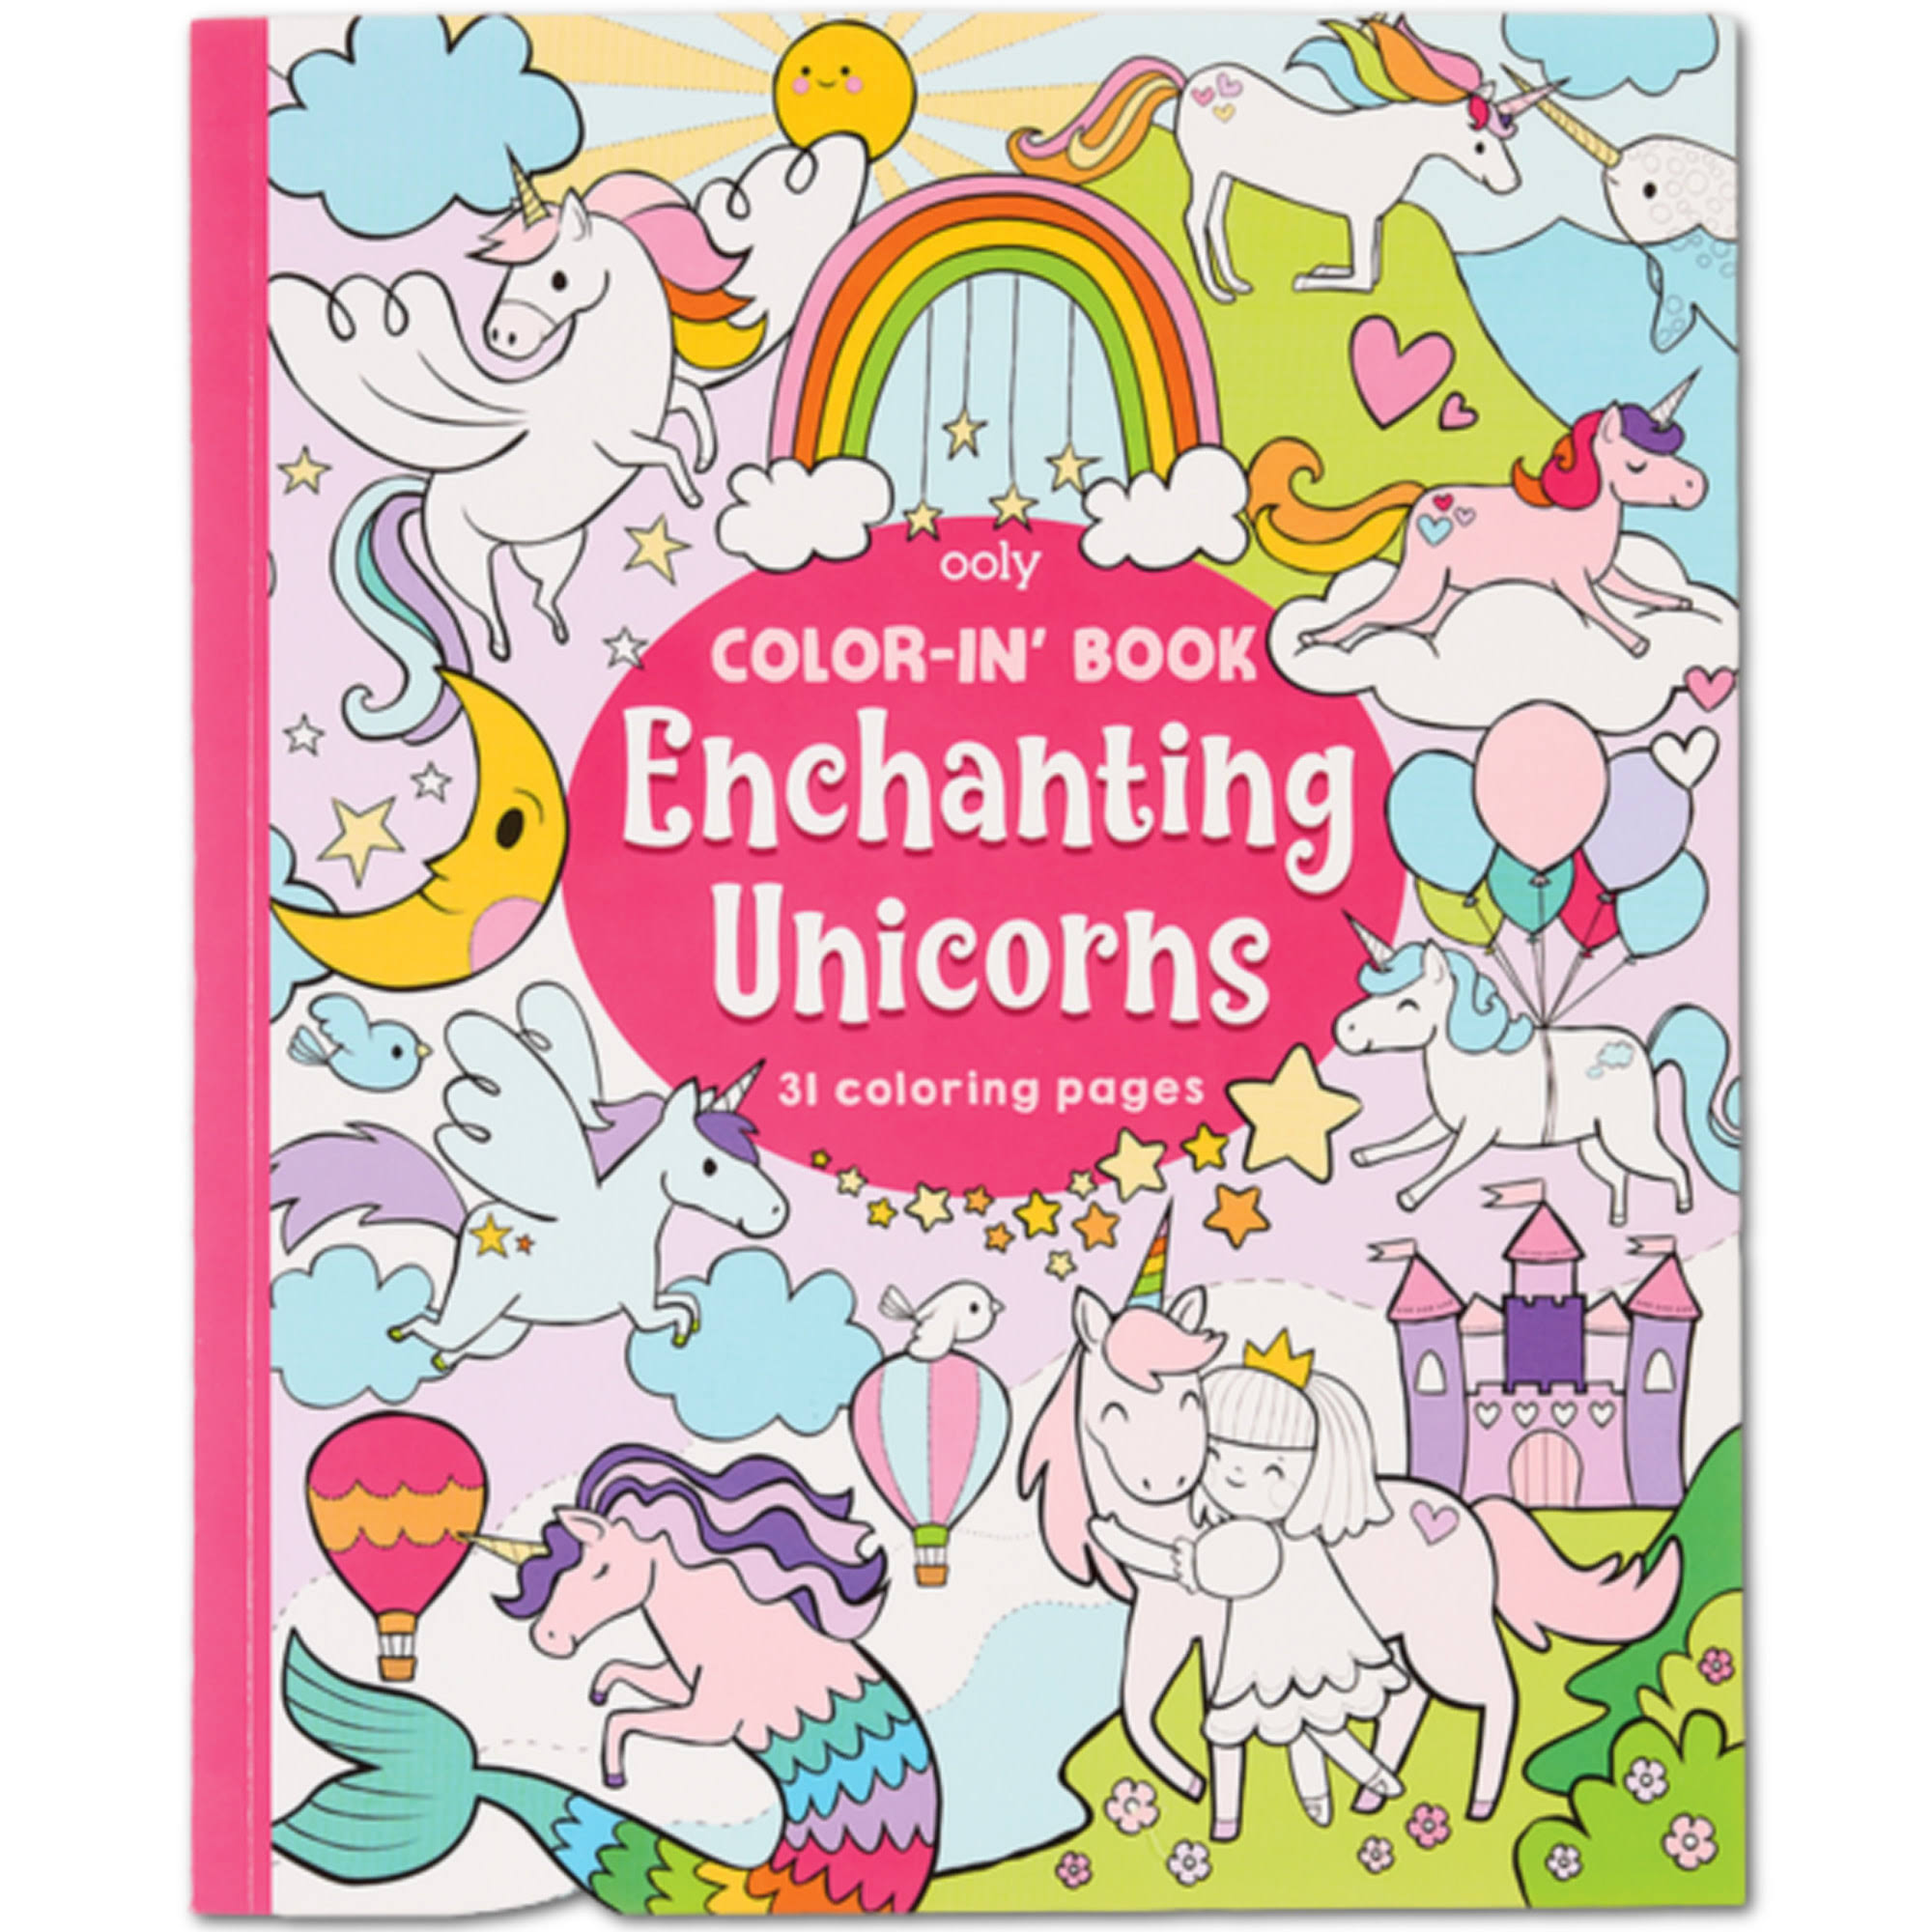 Color-In' Book Enchanting Unicorns [Book]